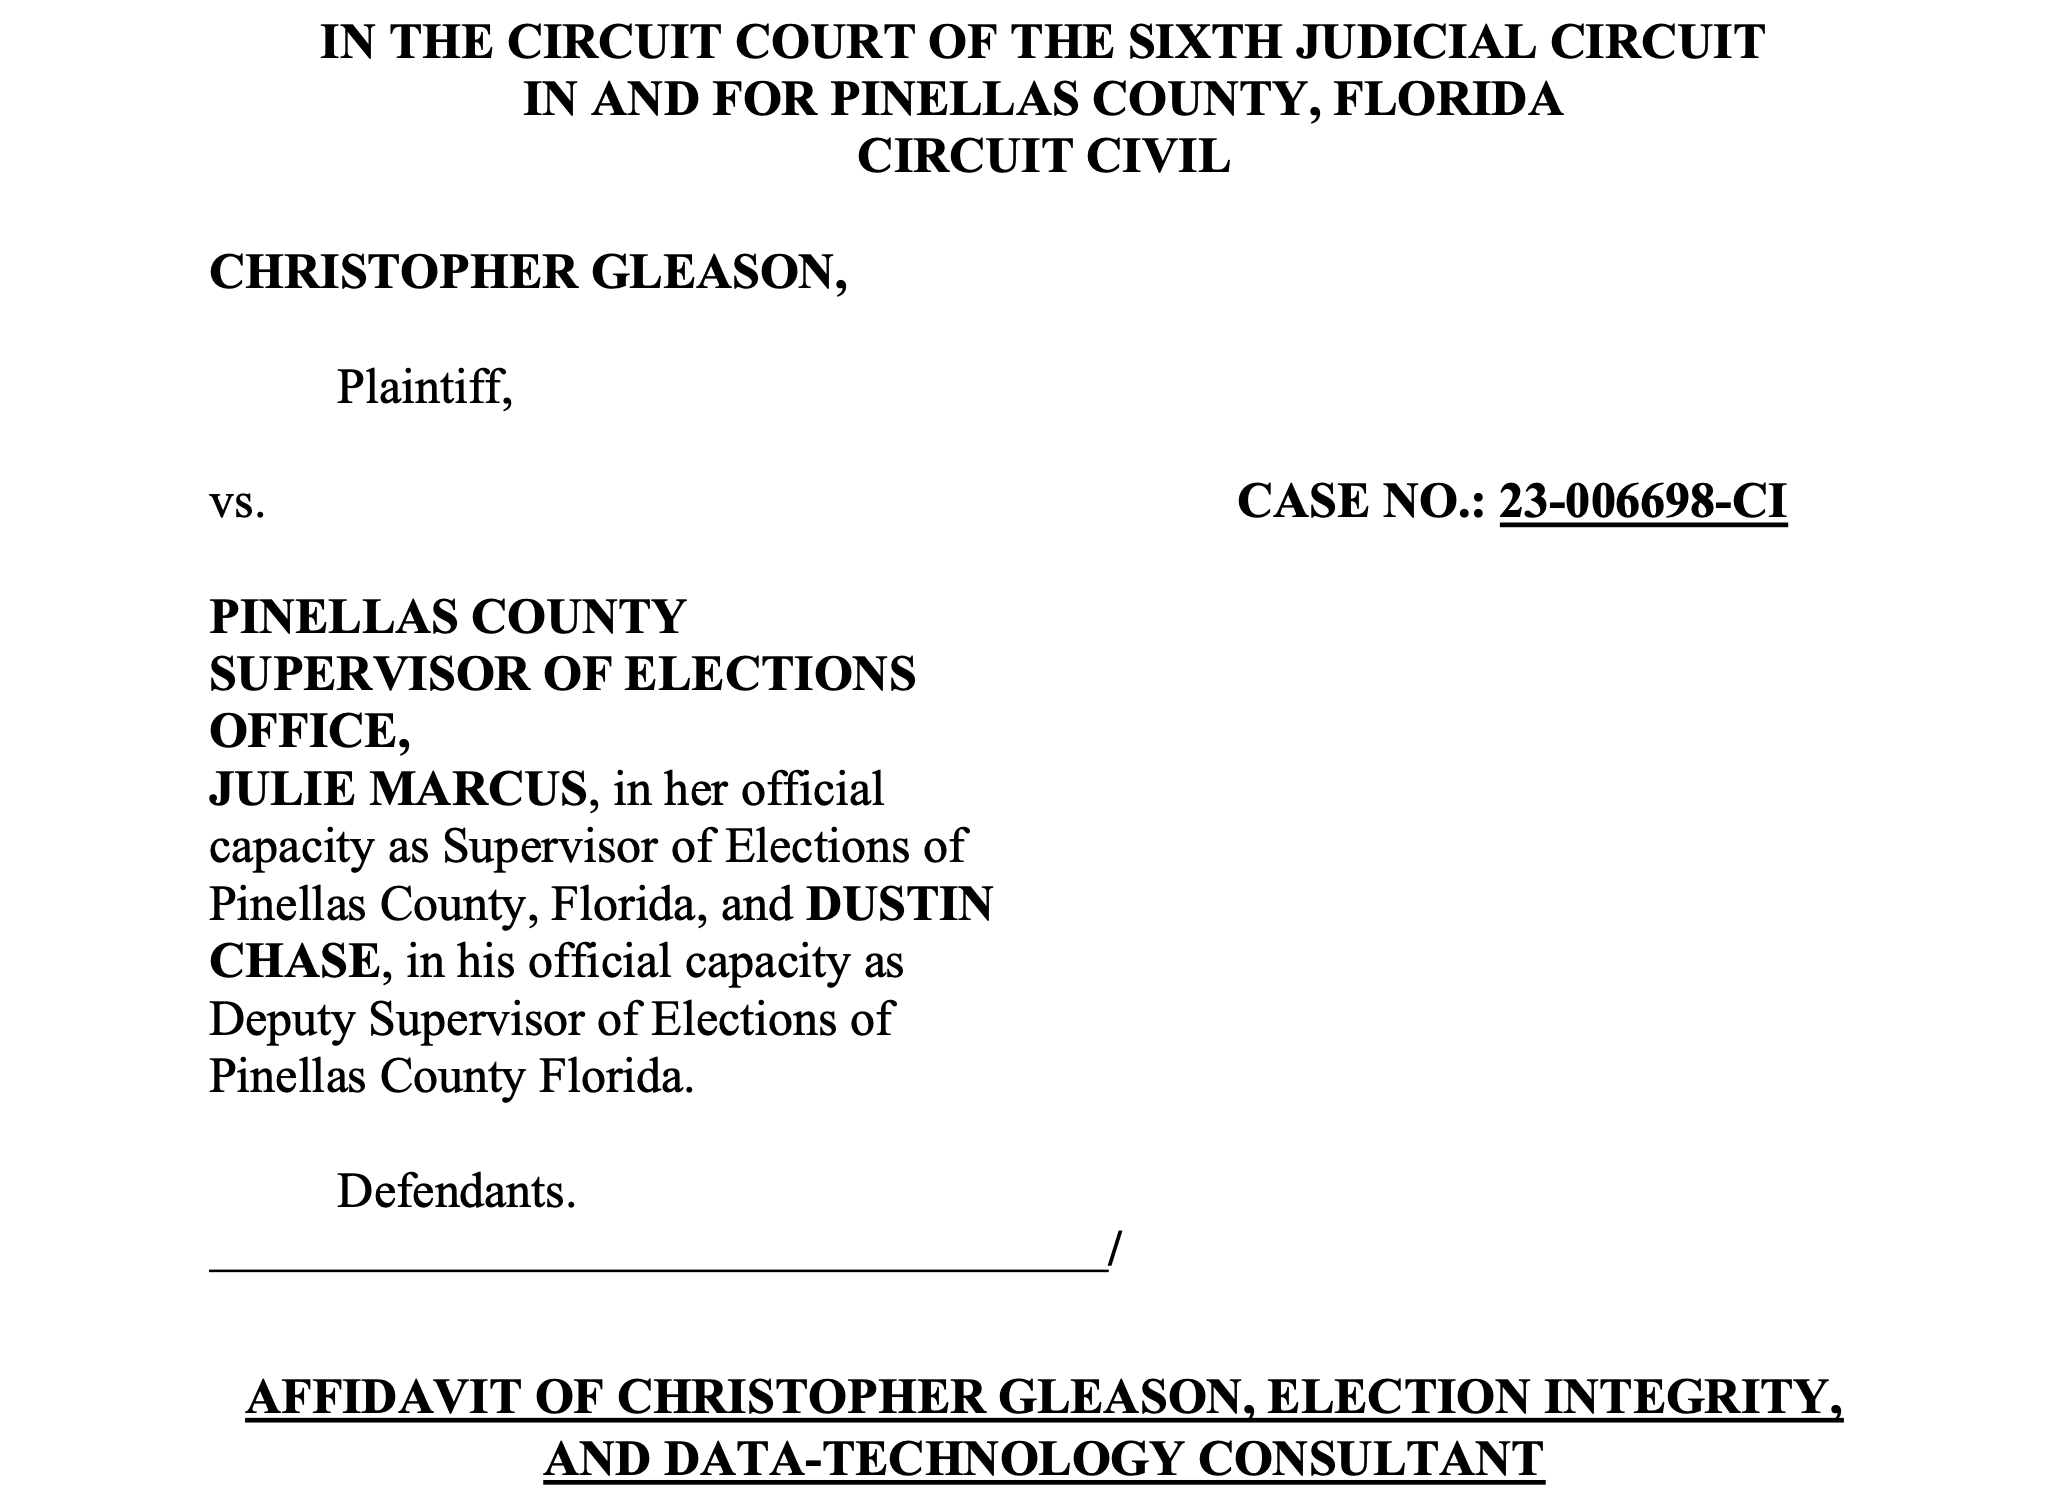 BREAKING: Gleason Files Affidavit In Pinellas County Accusing Officials Of Perjury, Forgery, Altering Election Documents